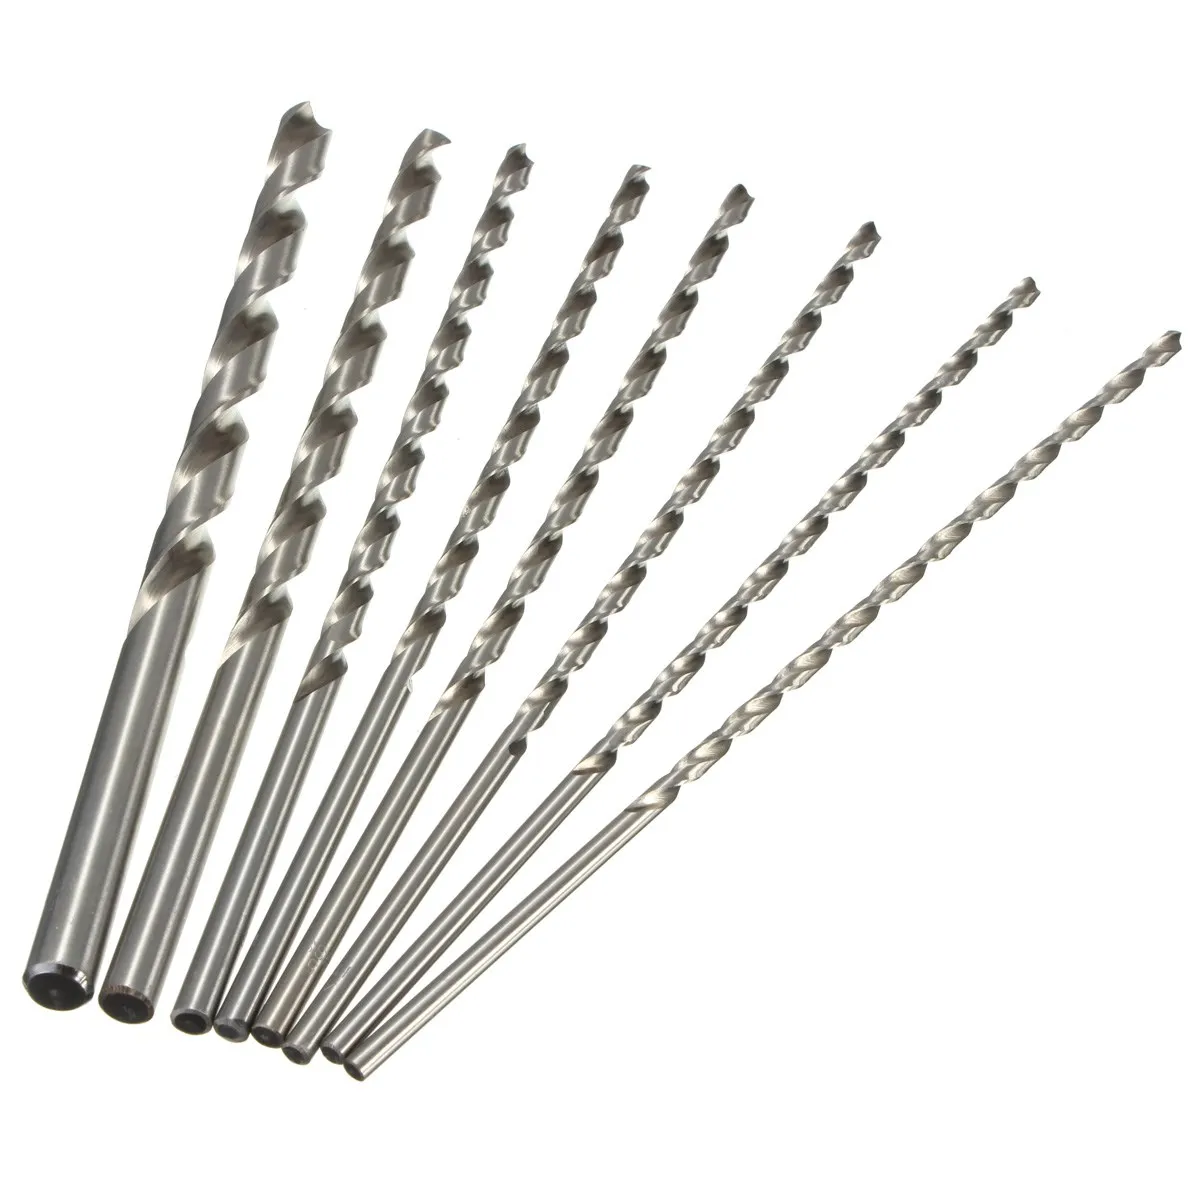 

1PC Extra Long 200mm HSS Twist Drill 4mm 5mm 6mm 8mm 10mm Straigth Shank Auger Wood Metal Drilling Tool Top Quality